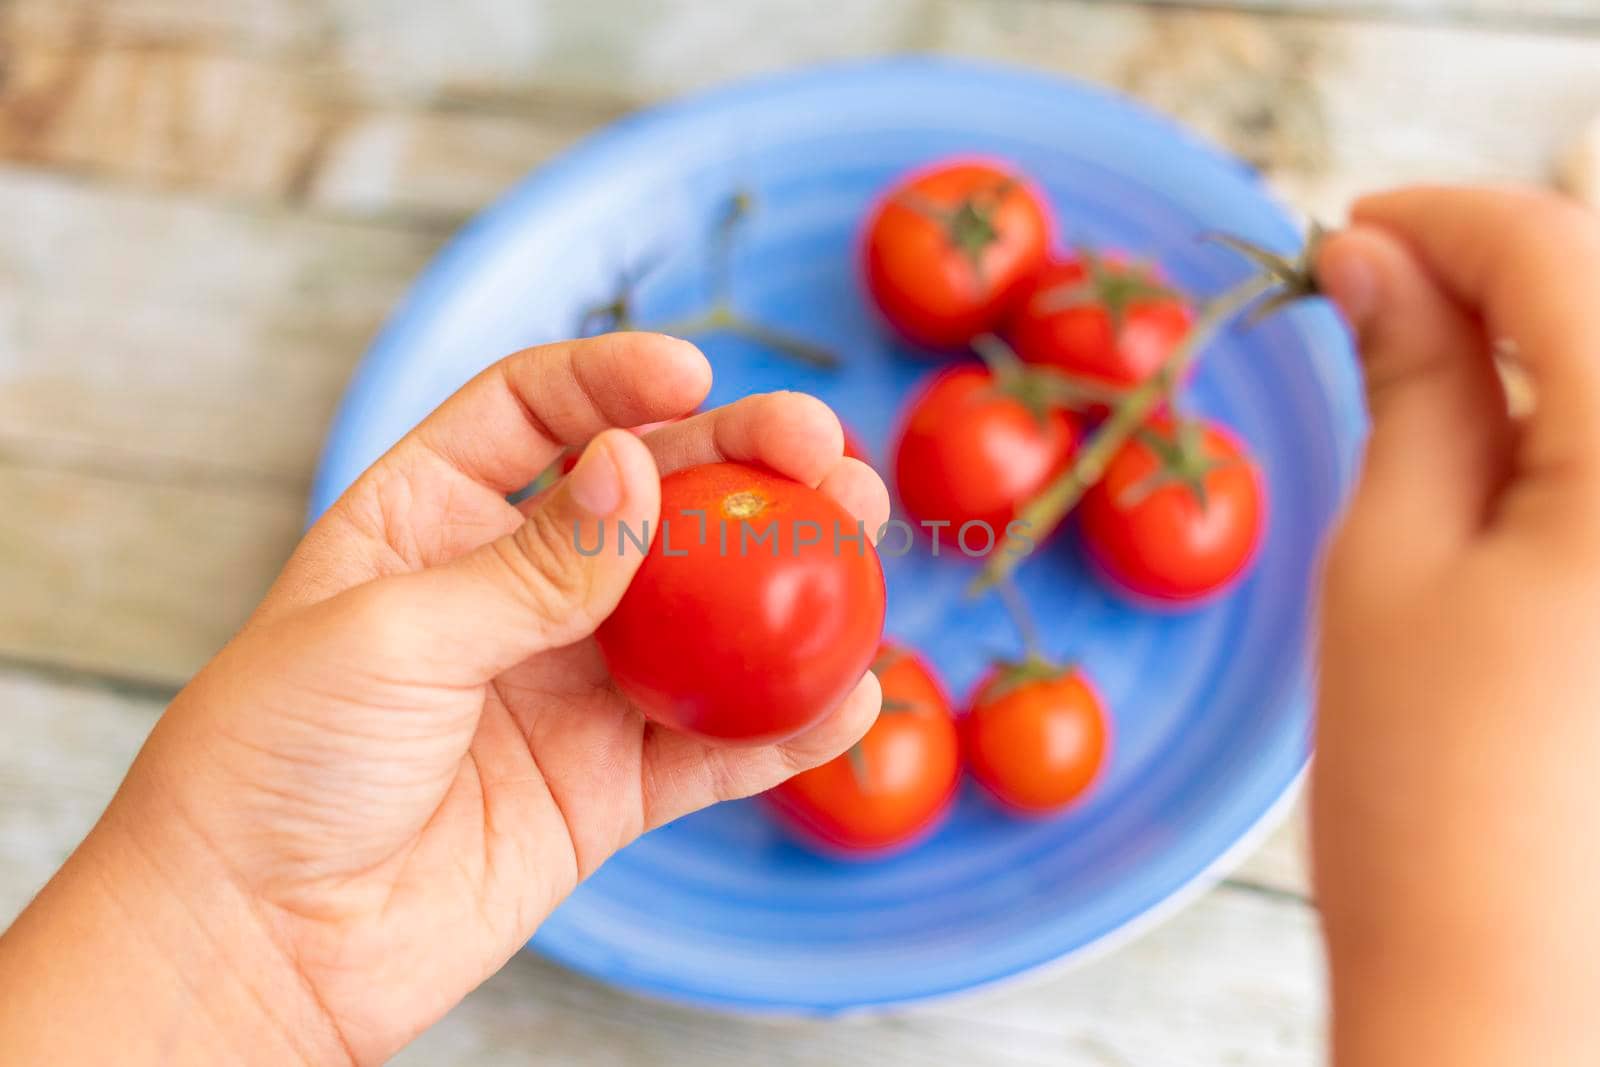 Hands holding cherries tomatoes by eagg13